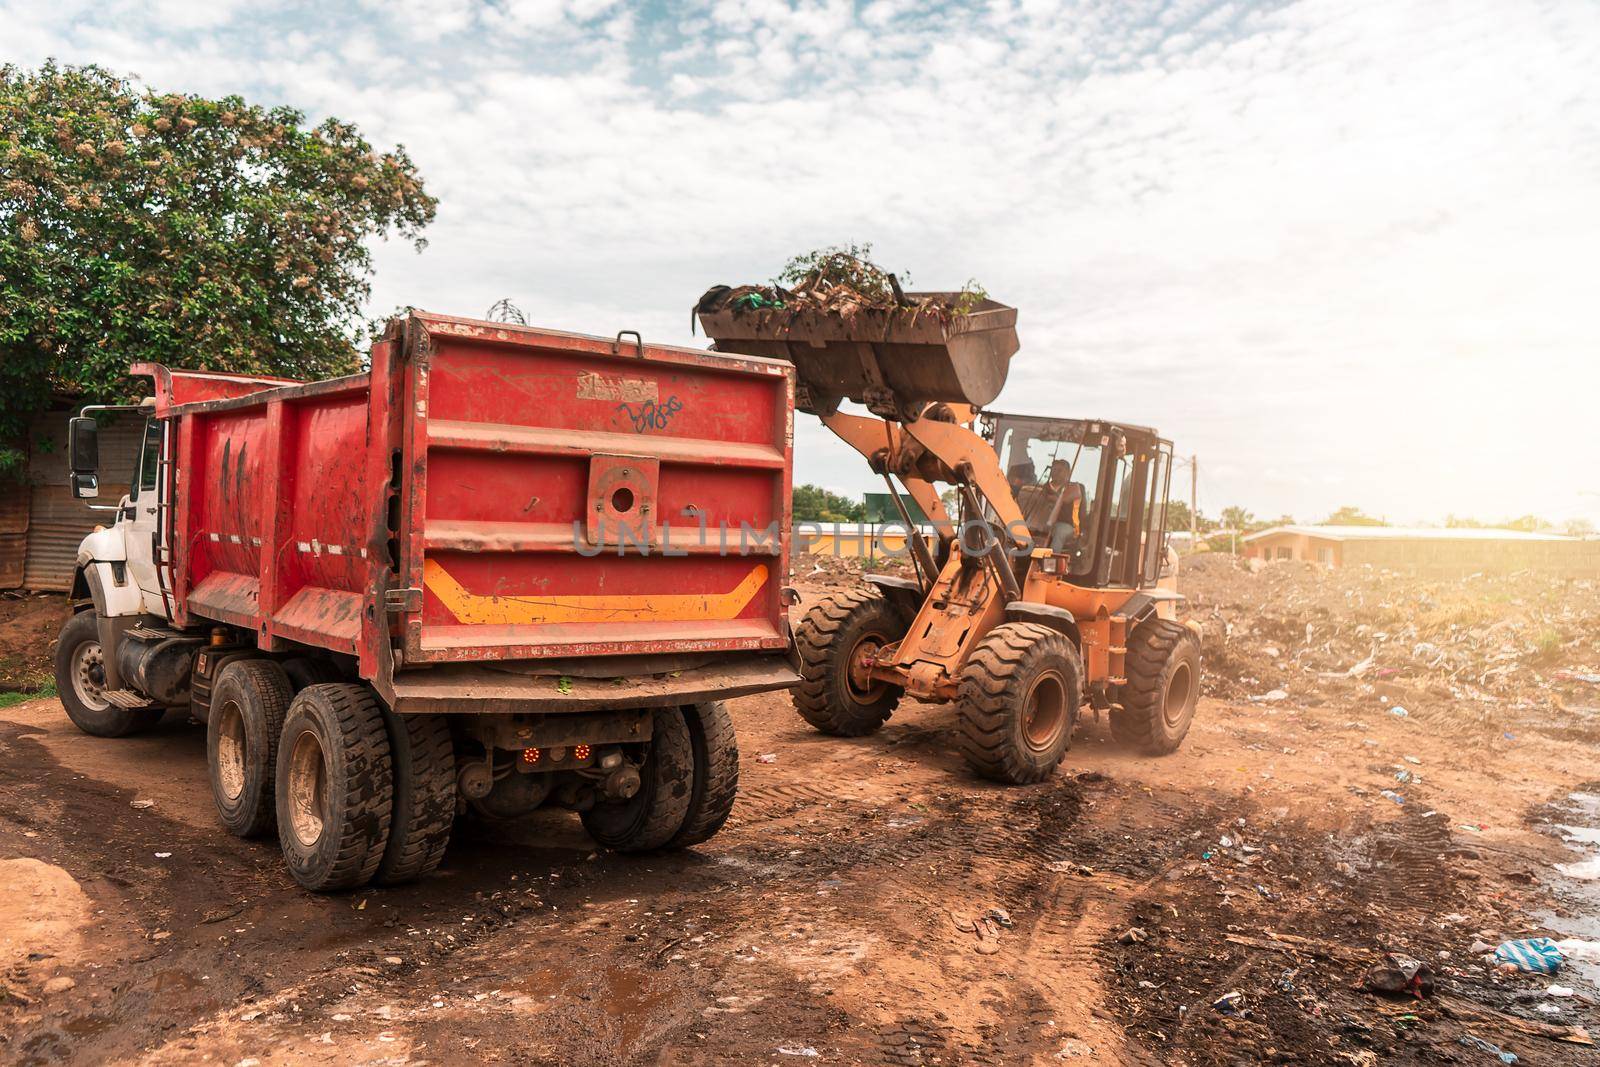 A mechanical shovel and a tractor collecting waste in a garbage dump in a city of Managua, Nicaragua. Concept of cleaning in communities of Central America, Latin America and Central America.